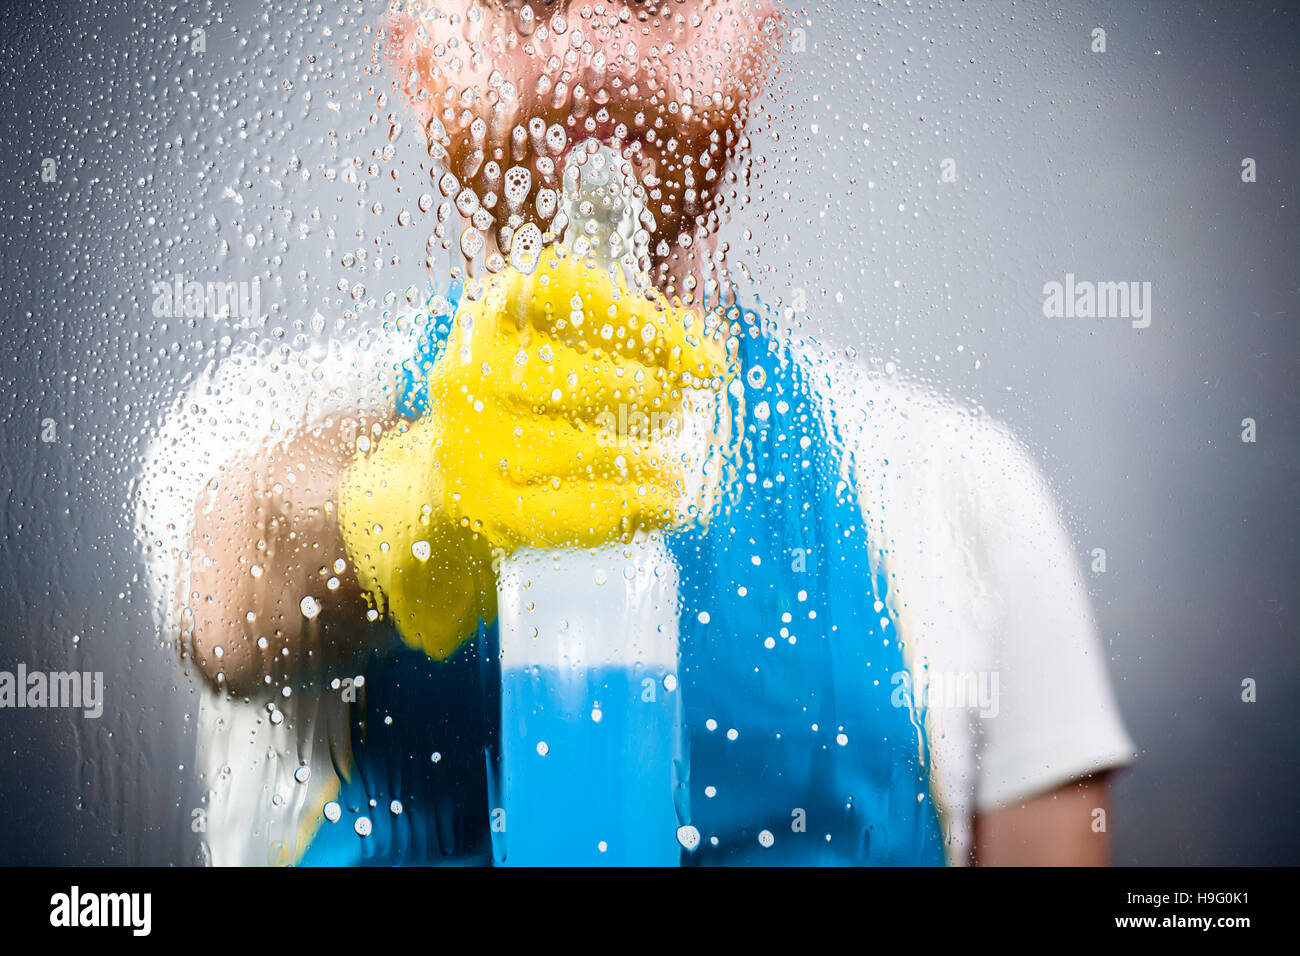 Cleaner Man Spraying a Detergent Wearing an Apron and Plastic Gloves Stock Photo